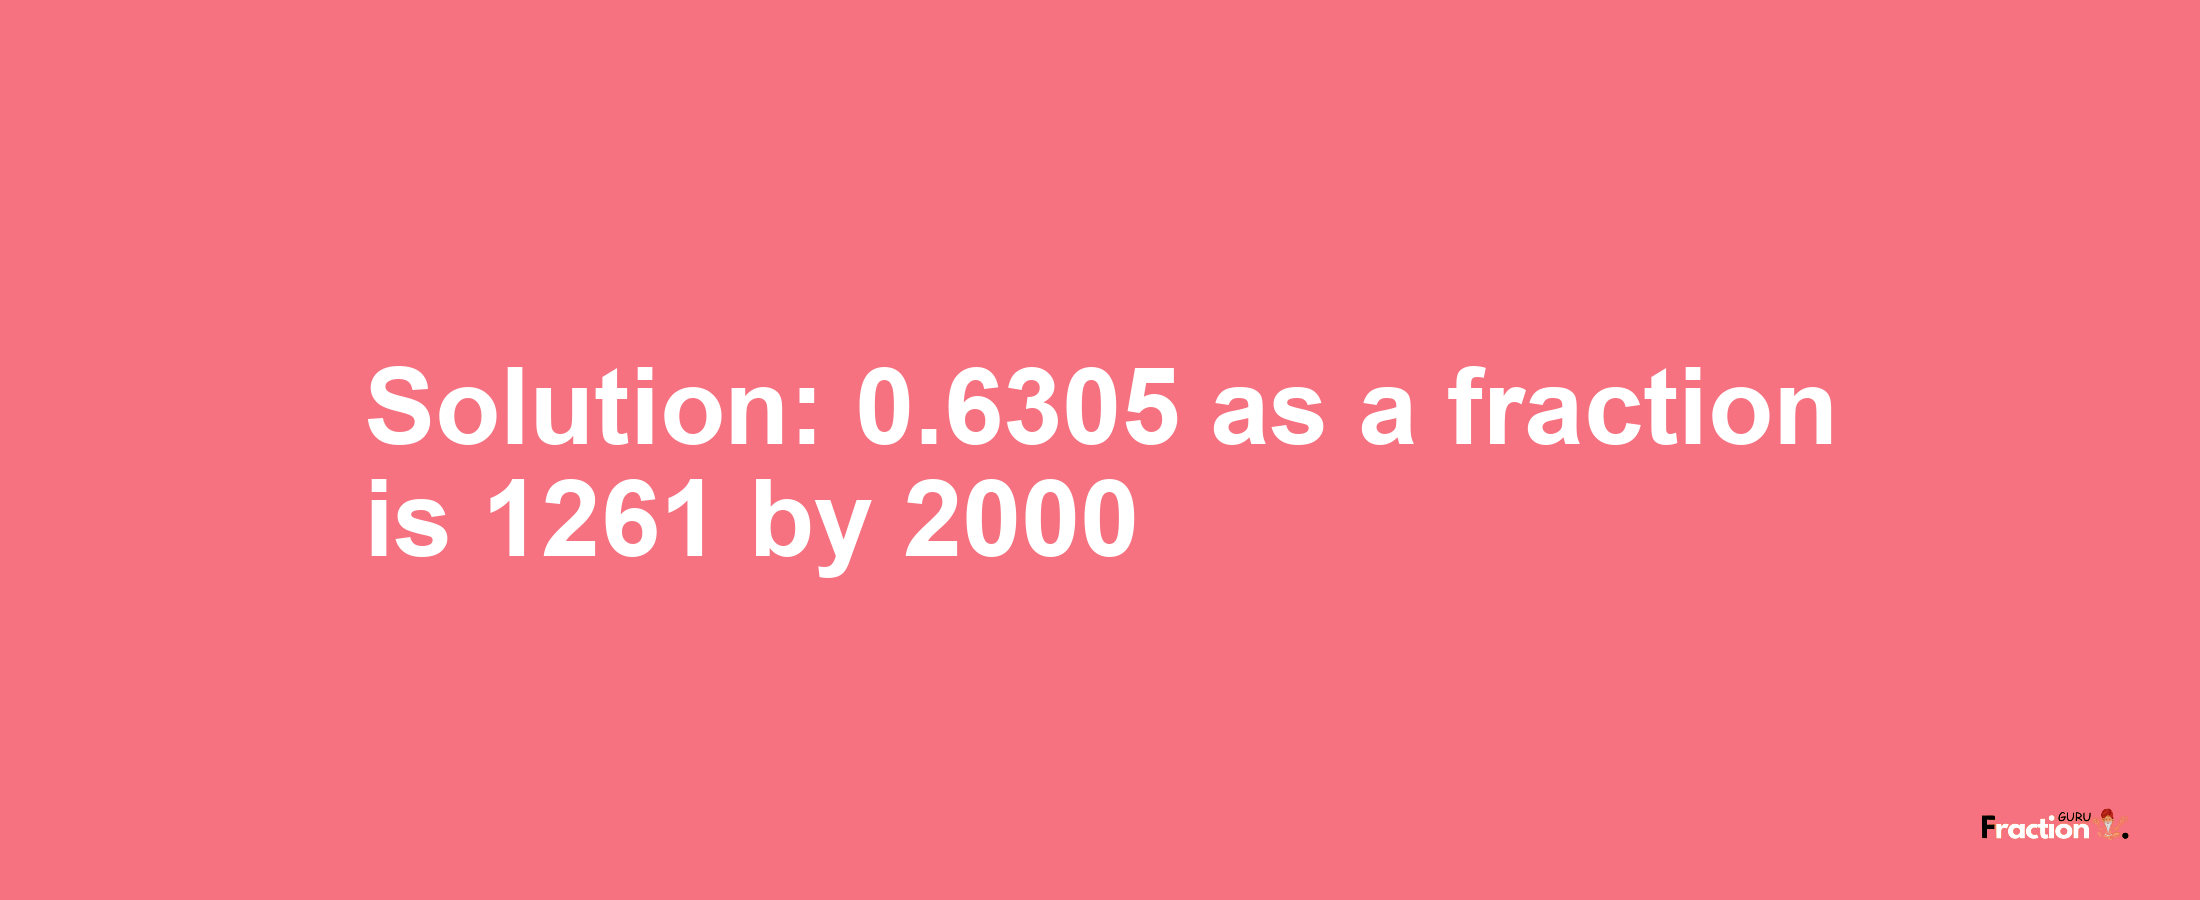 Solution:0.6305 as a fraction is 1261/2000